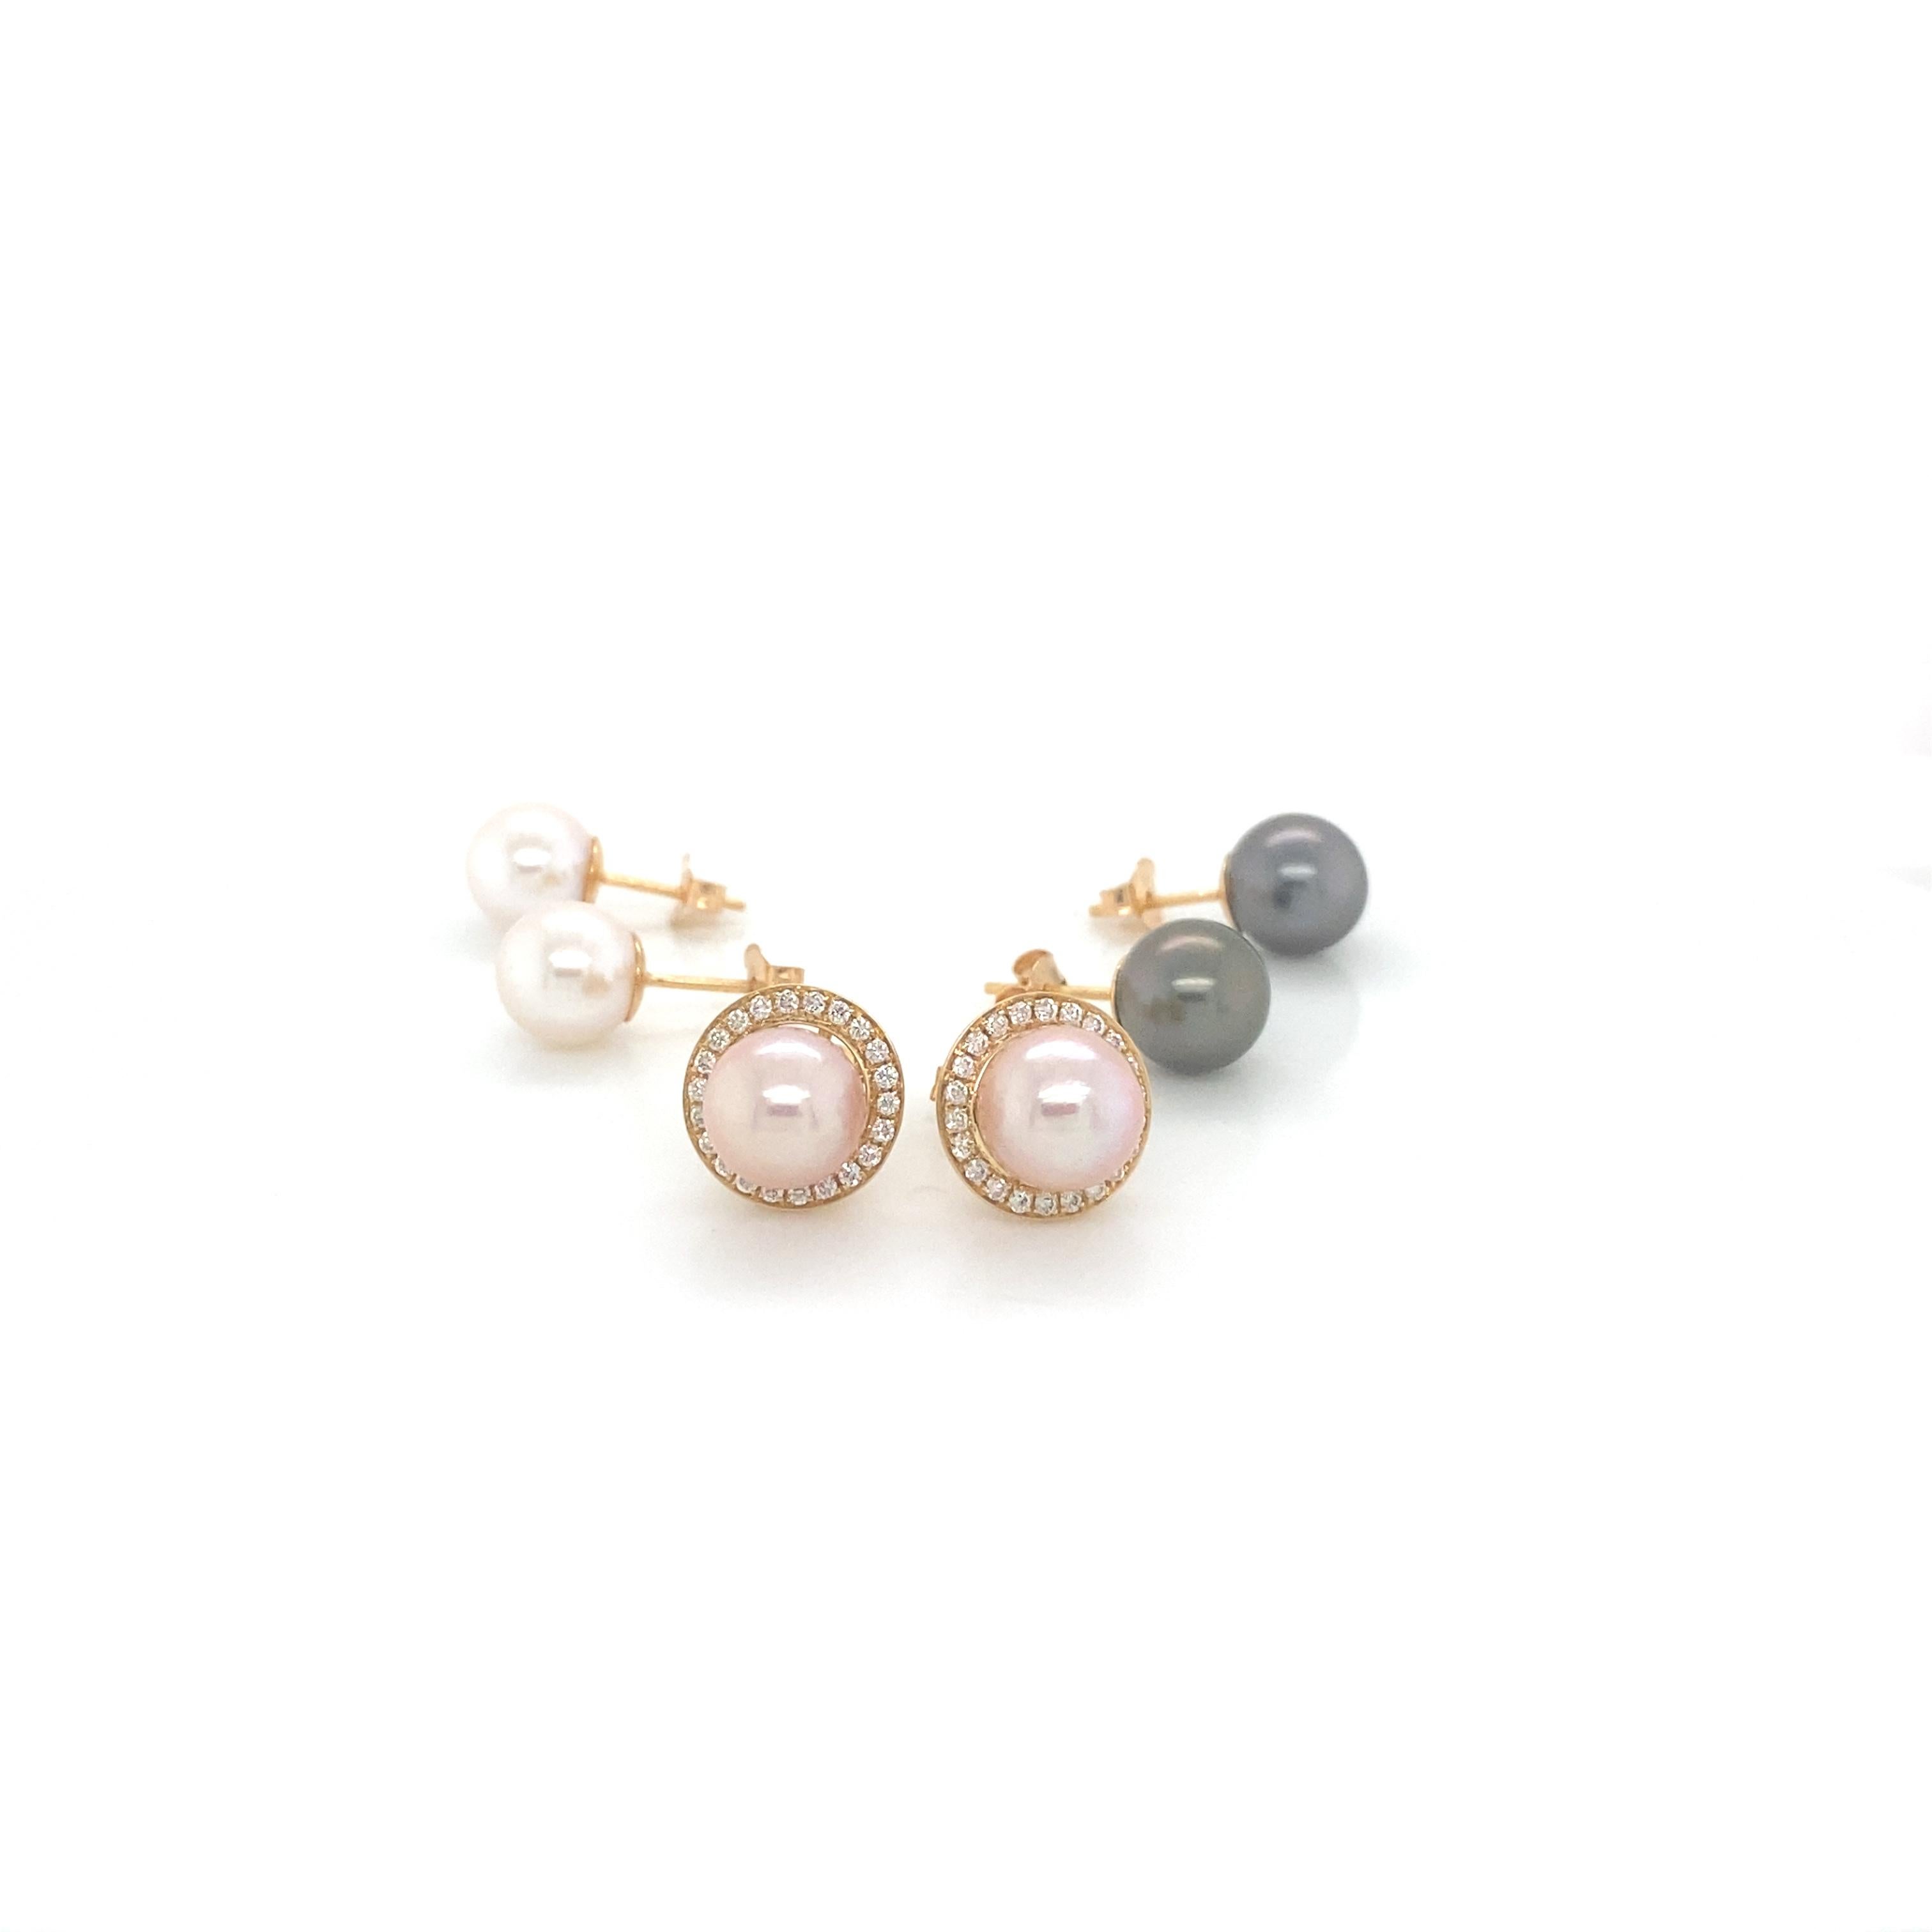 Discover the exquisite beauty of the diamond, cultured pearl and 18 carat yellow gold earrings, a jeweler's masterpiece that combines the sparkle of diamonds, the brilliance of cultured pearls and the nobility of yellow gold . These interchangeable